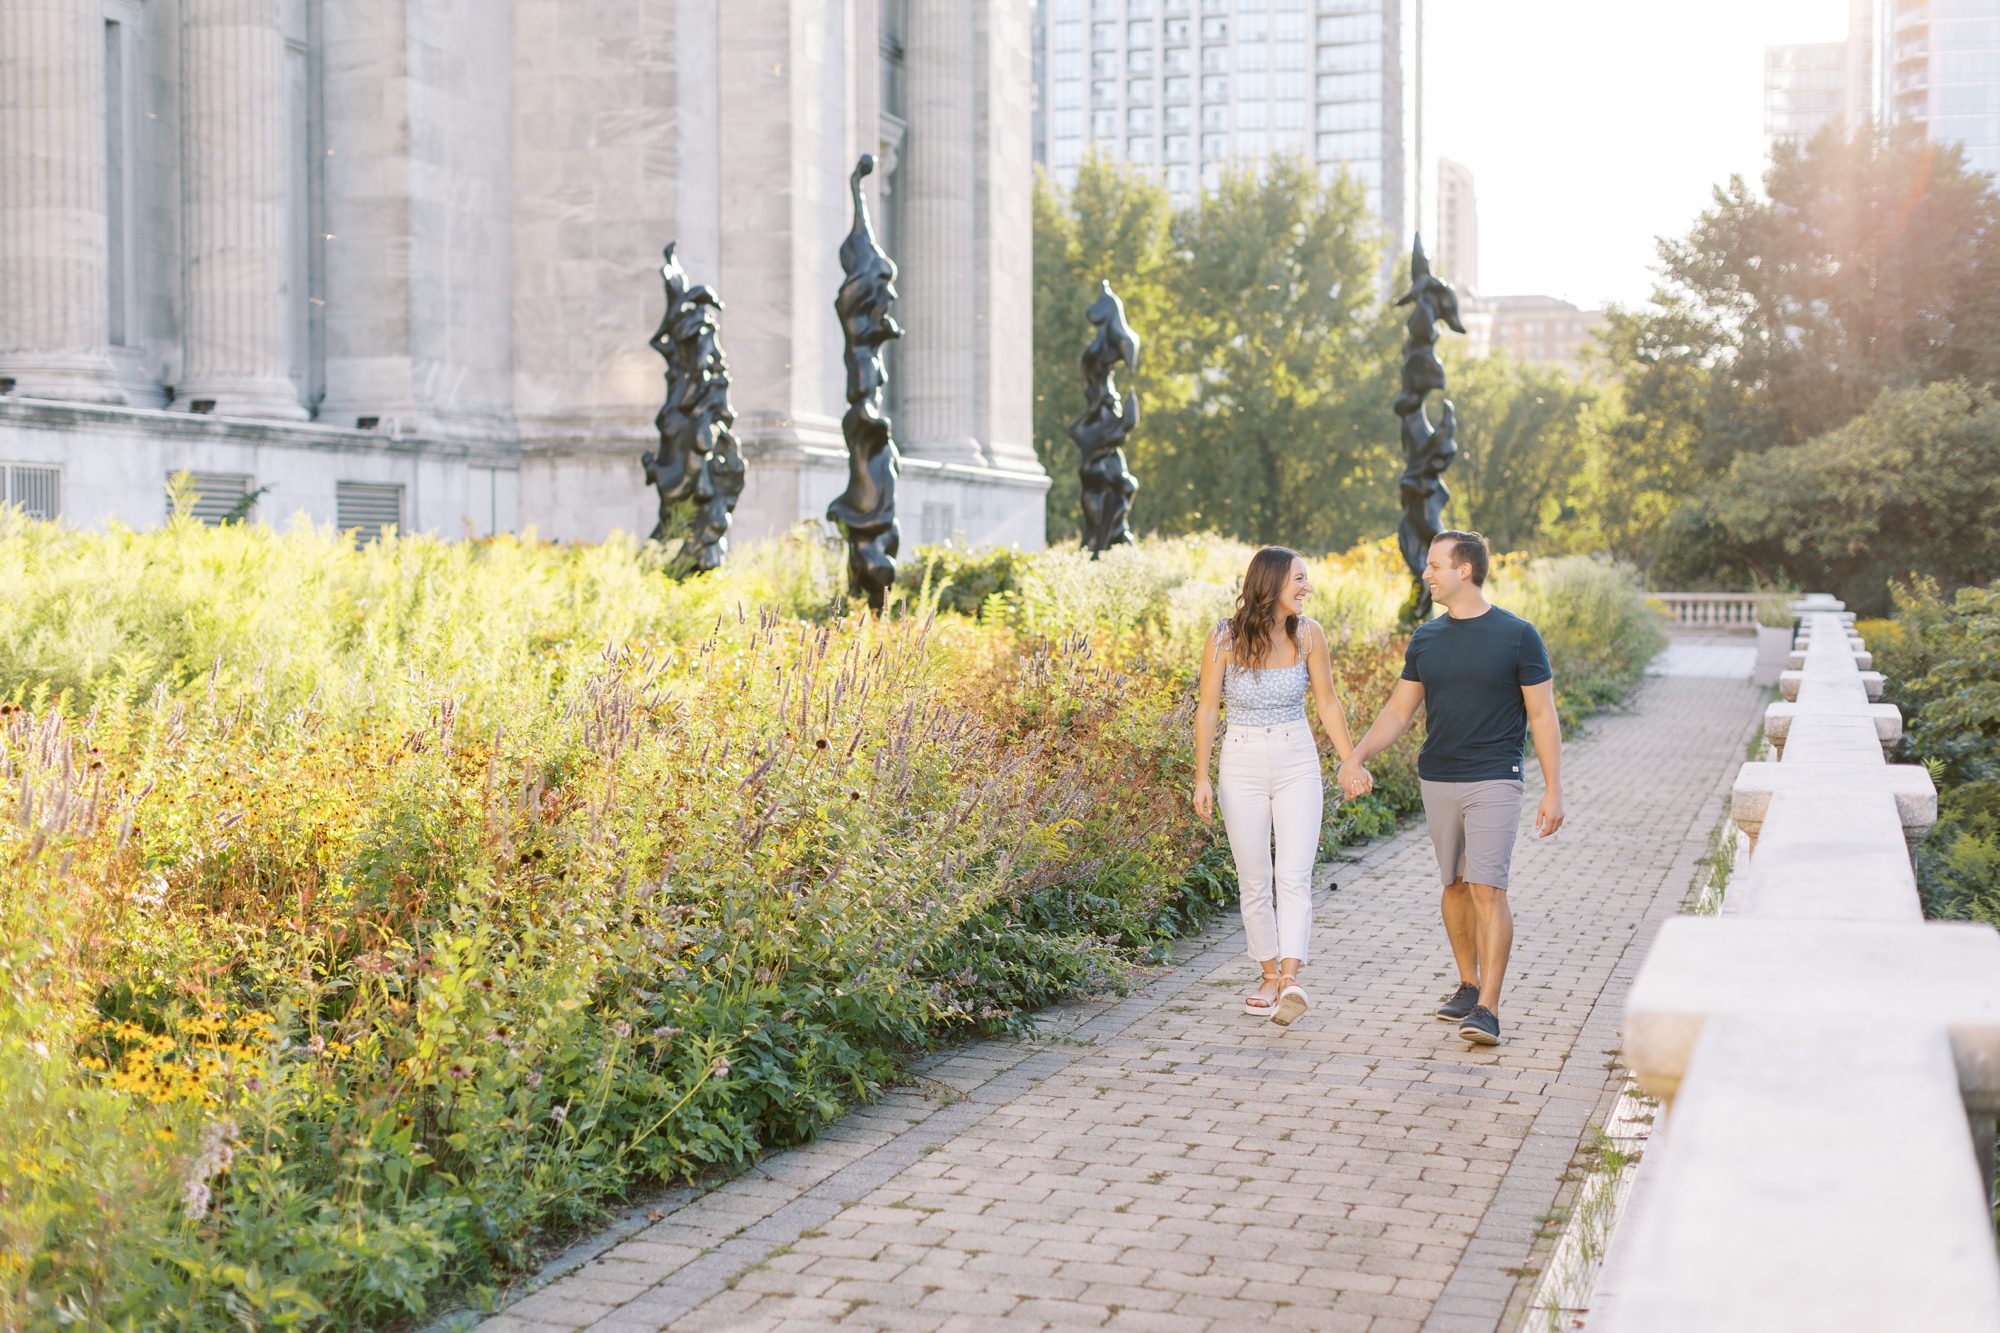 The couple explored during their Chicago Museum Campus engagement photos.